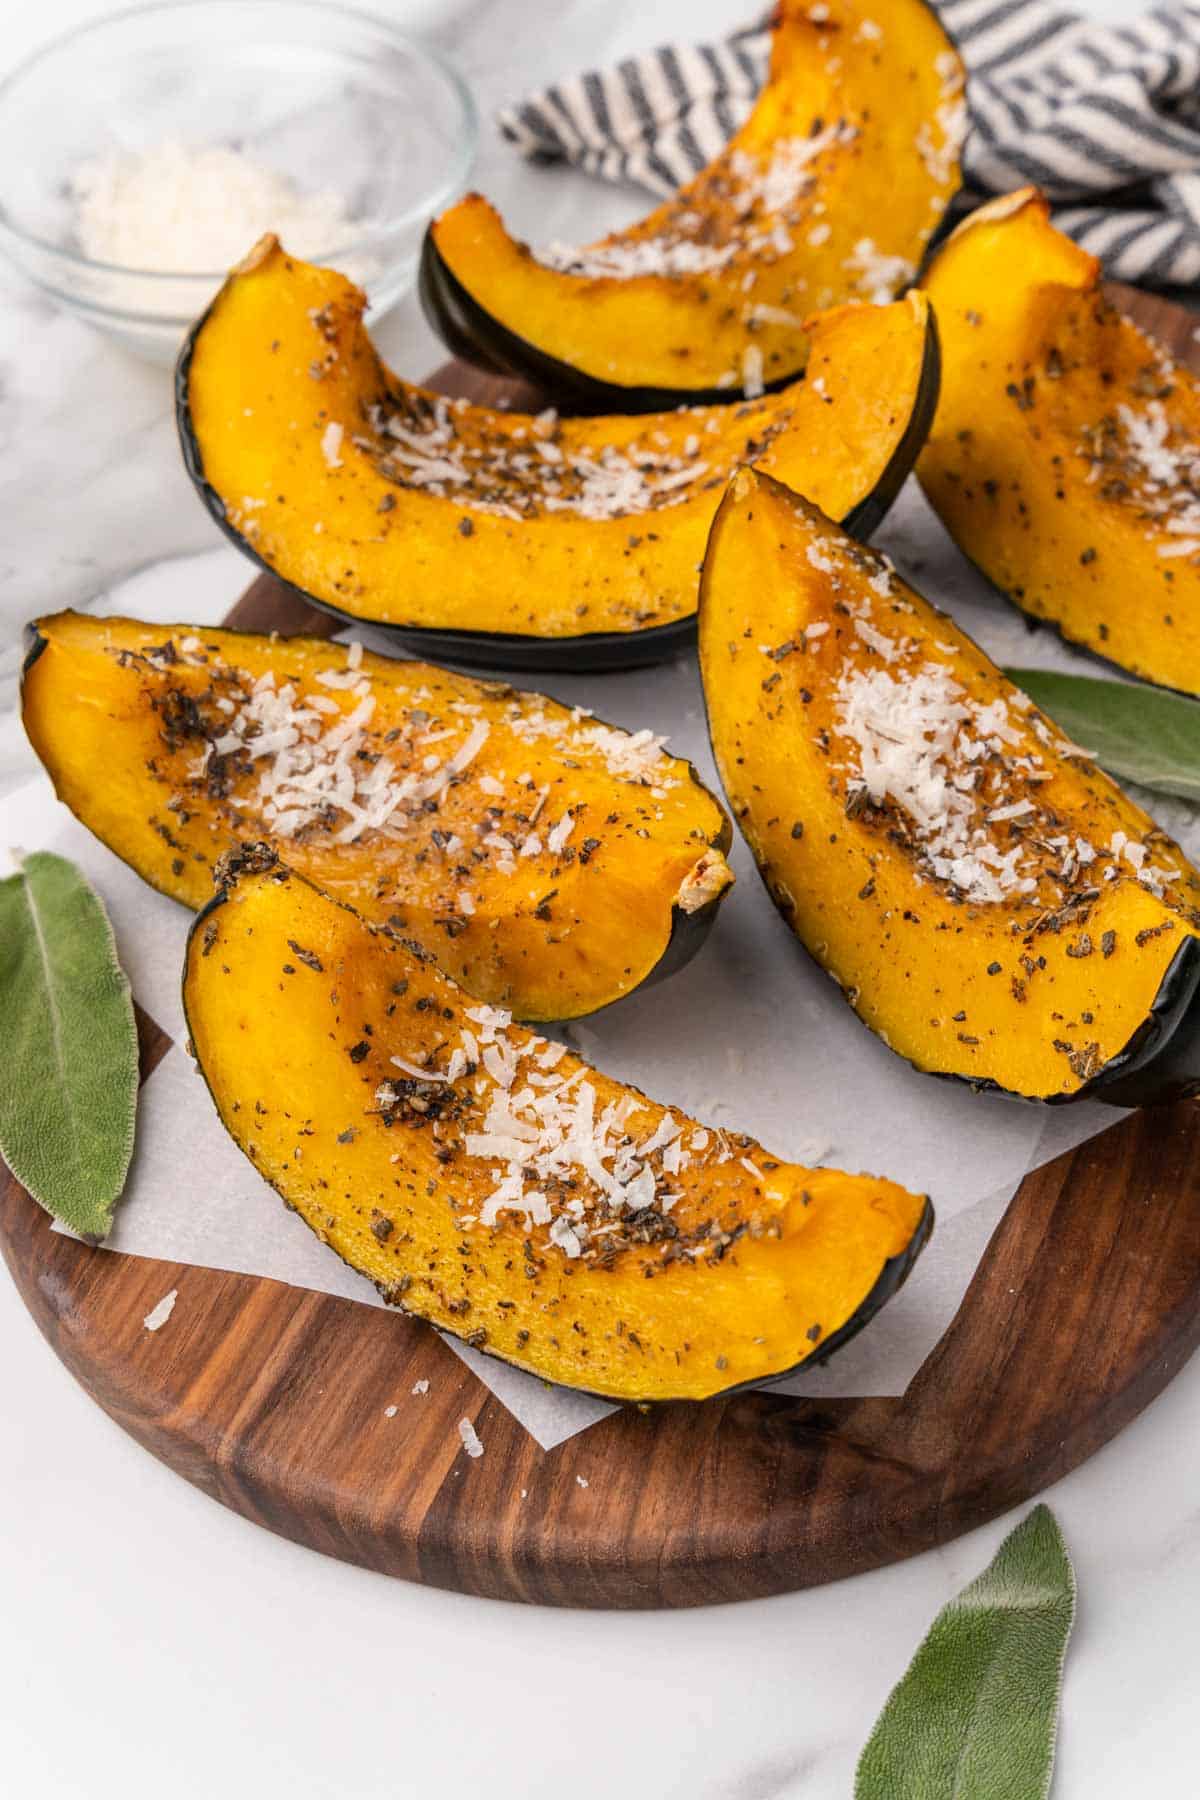 Acorn squash slices on parchment paper on an oval wooden serving tray with sage leaves placed decoratively around the slices